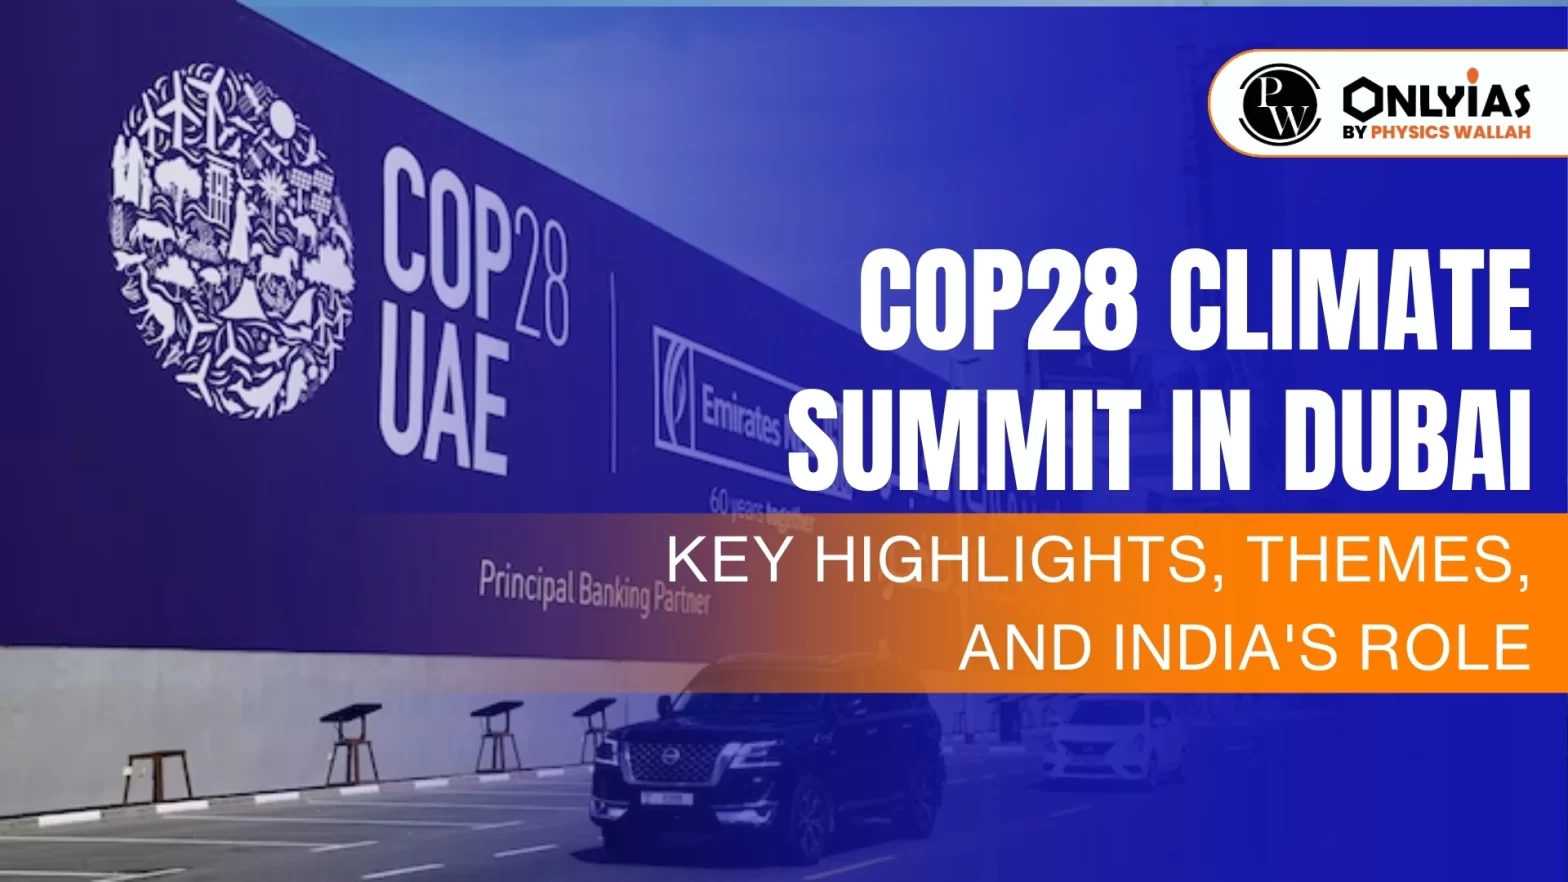 COP28 Climate Summit in Dubai: Key Highlights, Themes, and India’s Role